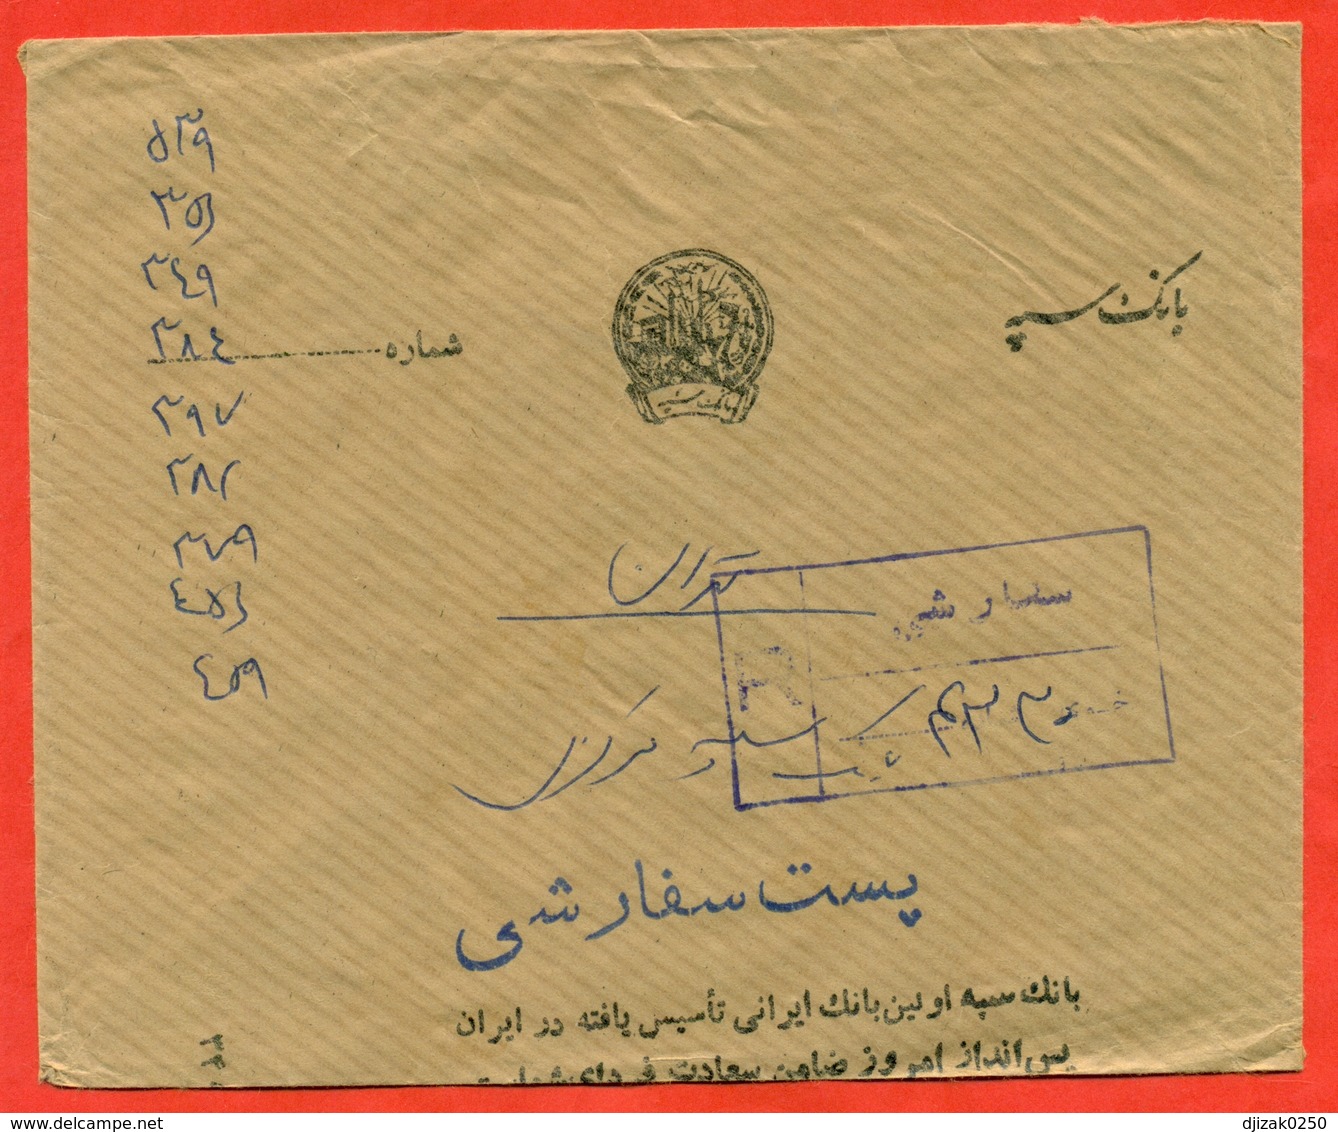 Iran 1975.Oil. Registered Envelope Passed The Mail. - Iran